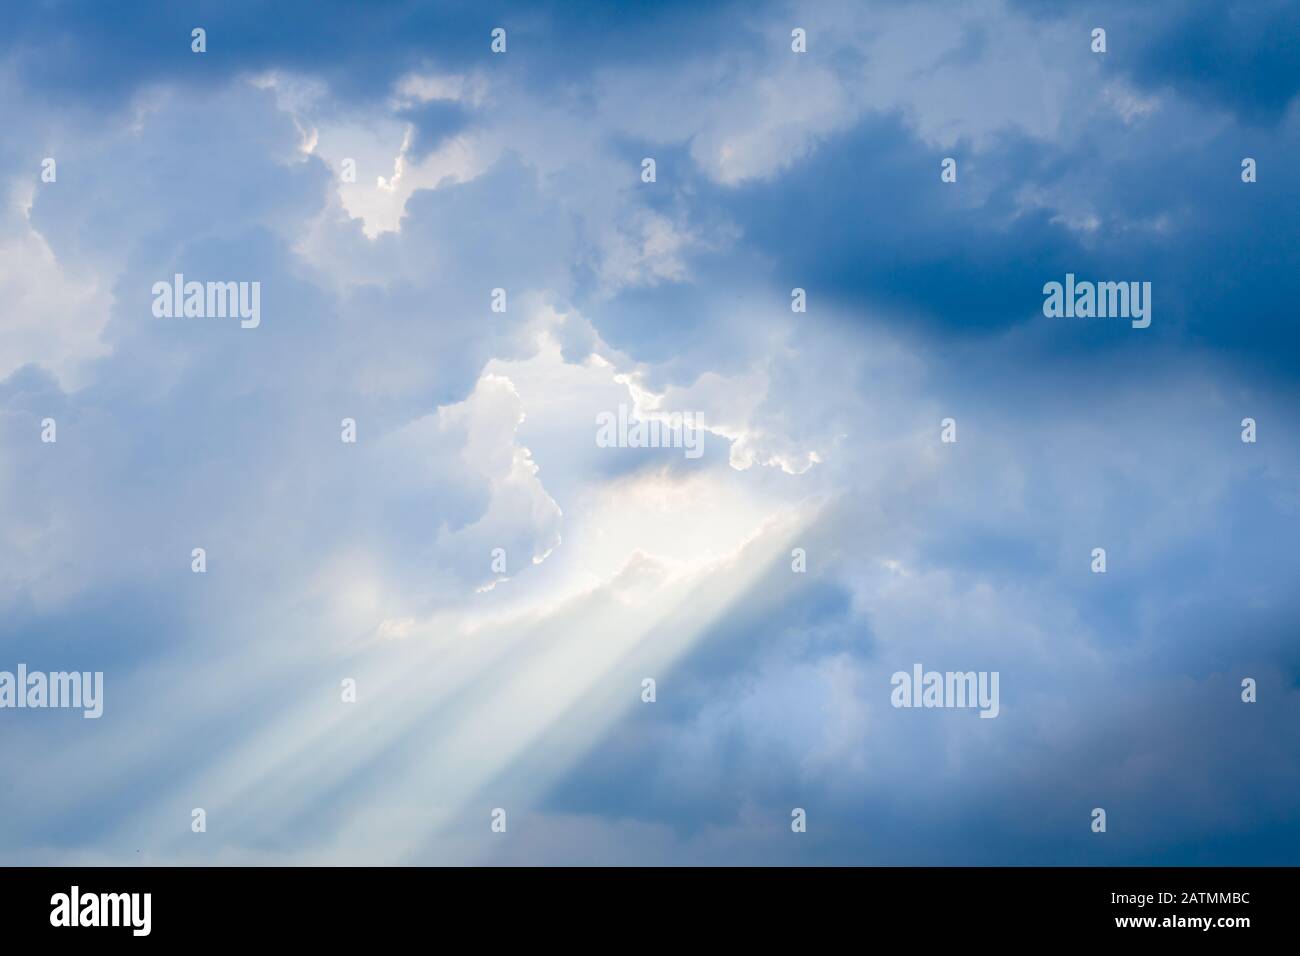 Miraculous heavenly sun light. Divine source of love. Higher power and life force concept Stock Photo